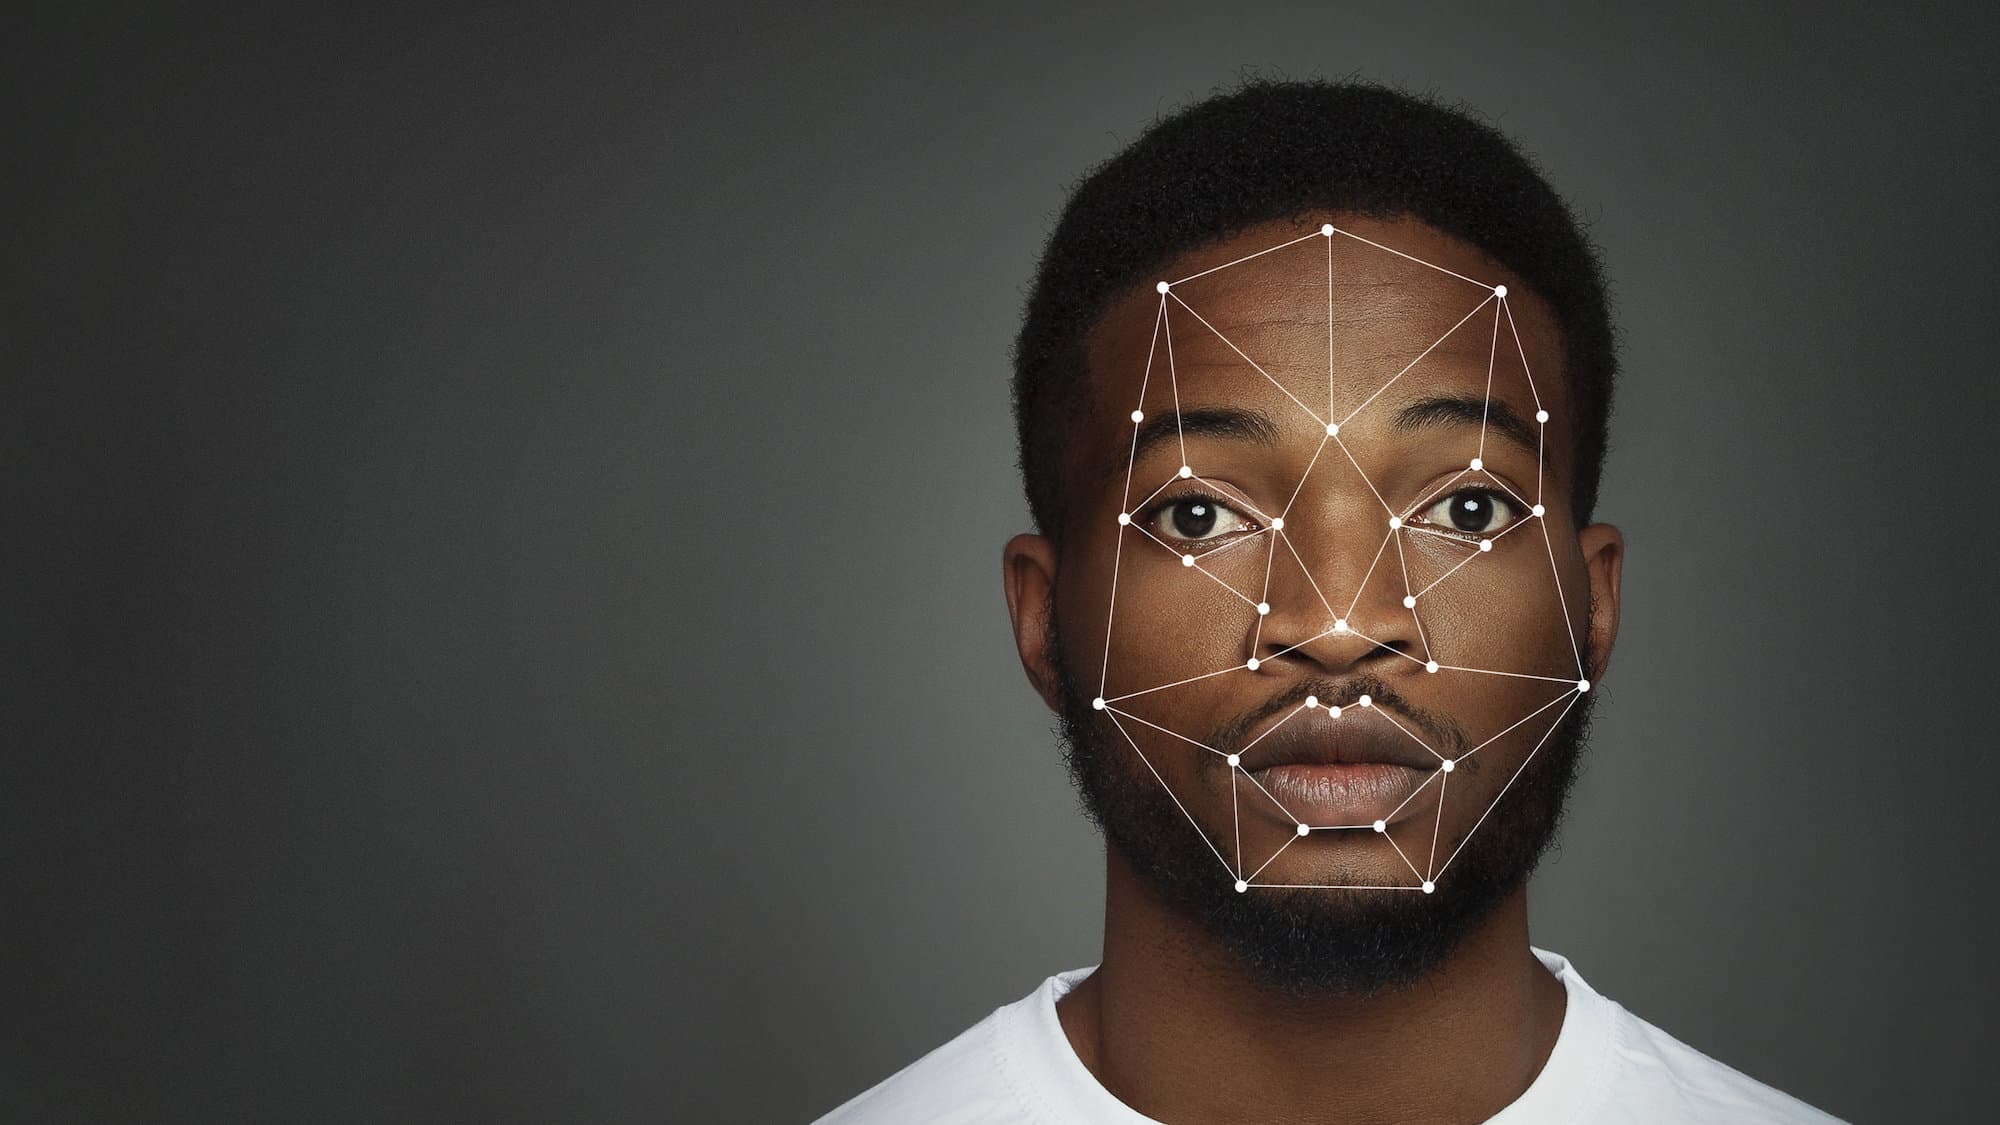 facial recognition software privacy concerns - Radio Health Journal